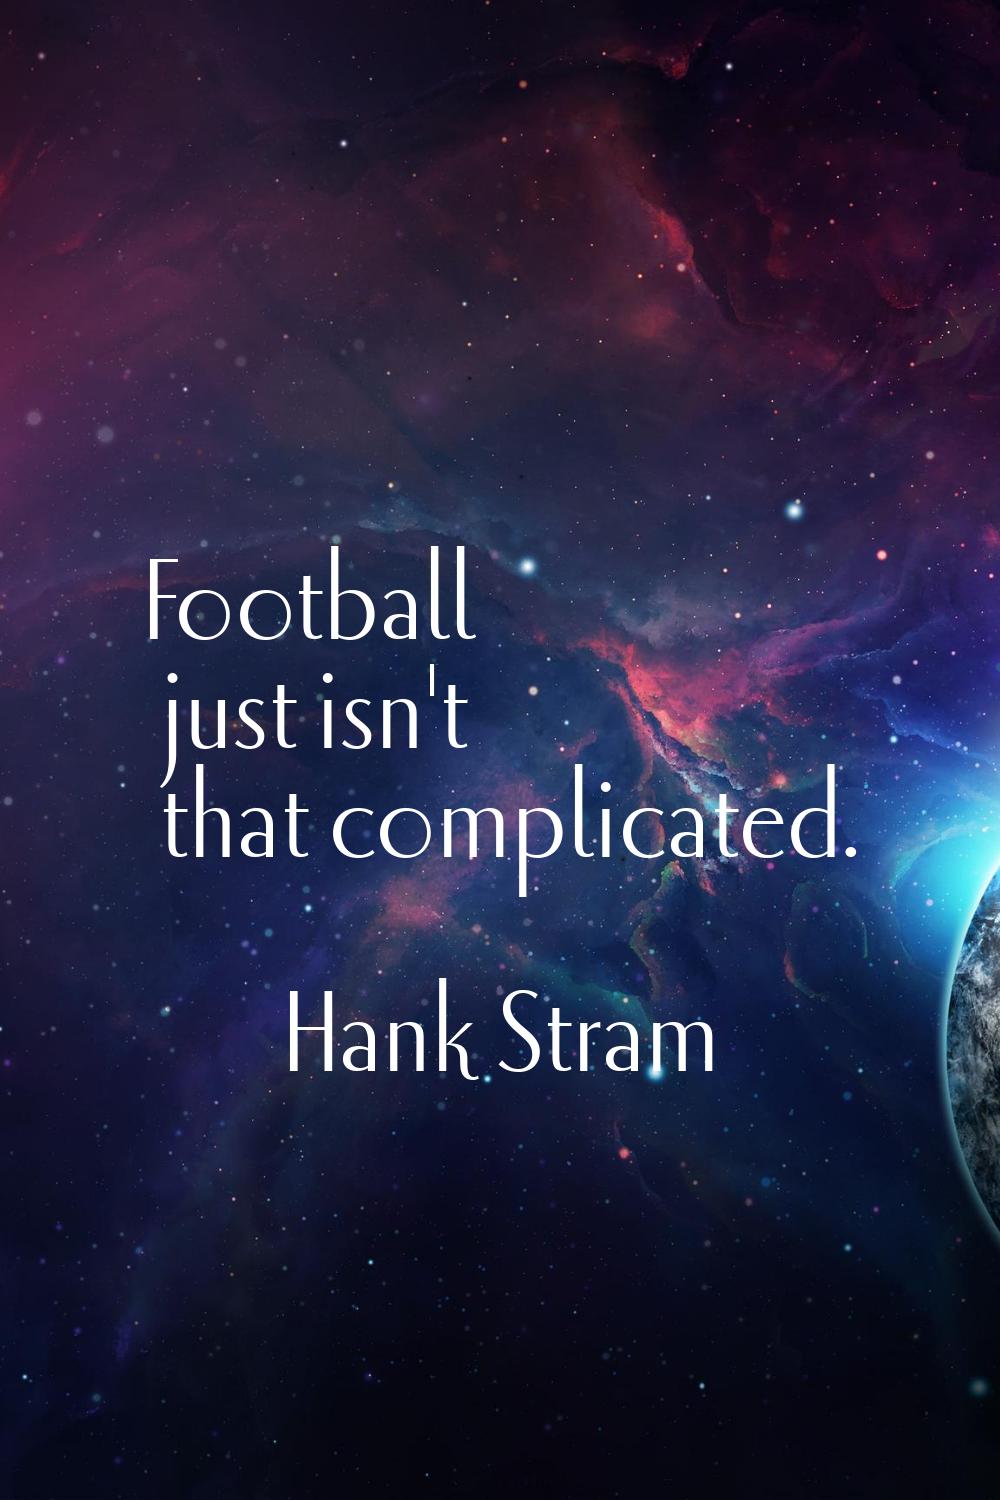 Football just isn't that complicated.